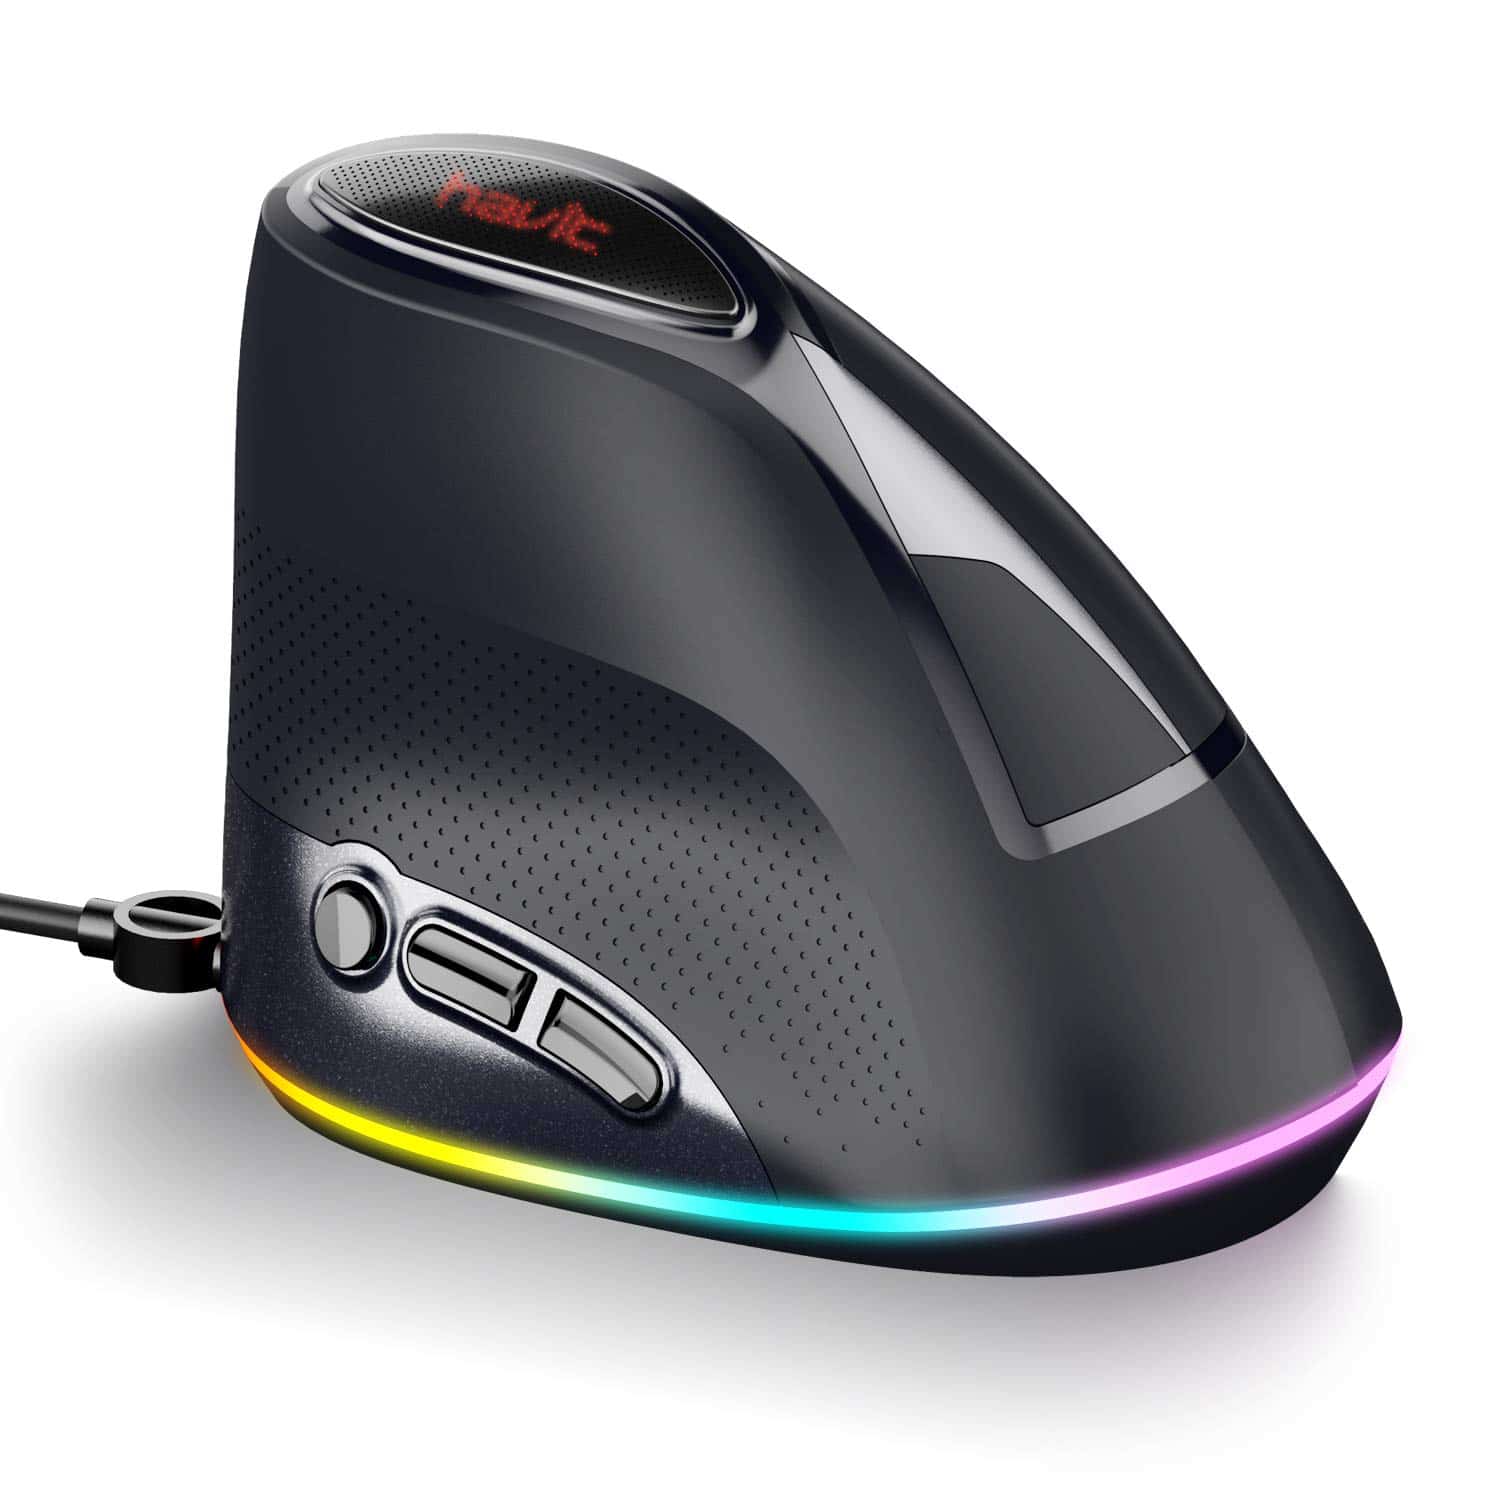 HAVIT HV-MS764 Wired Ergonomic Vertical Mouse with RGB Backlit